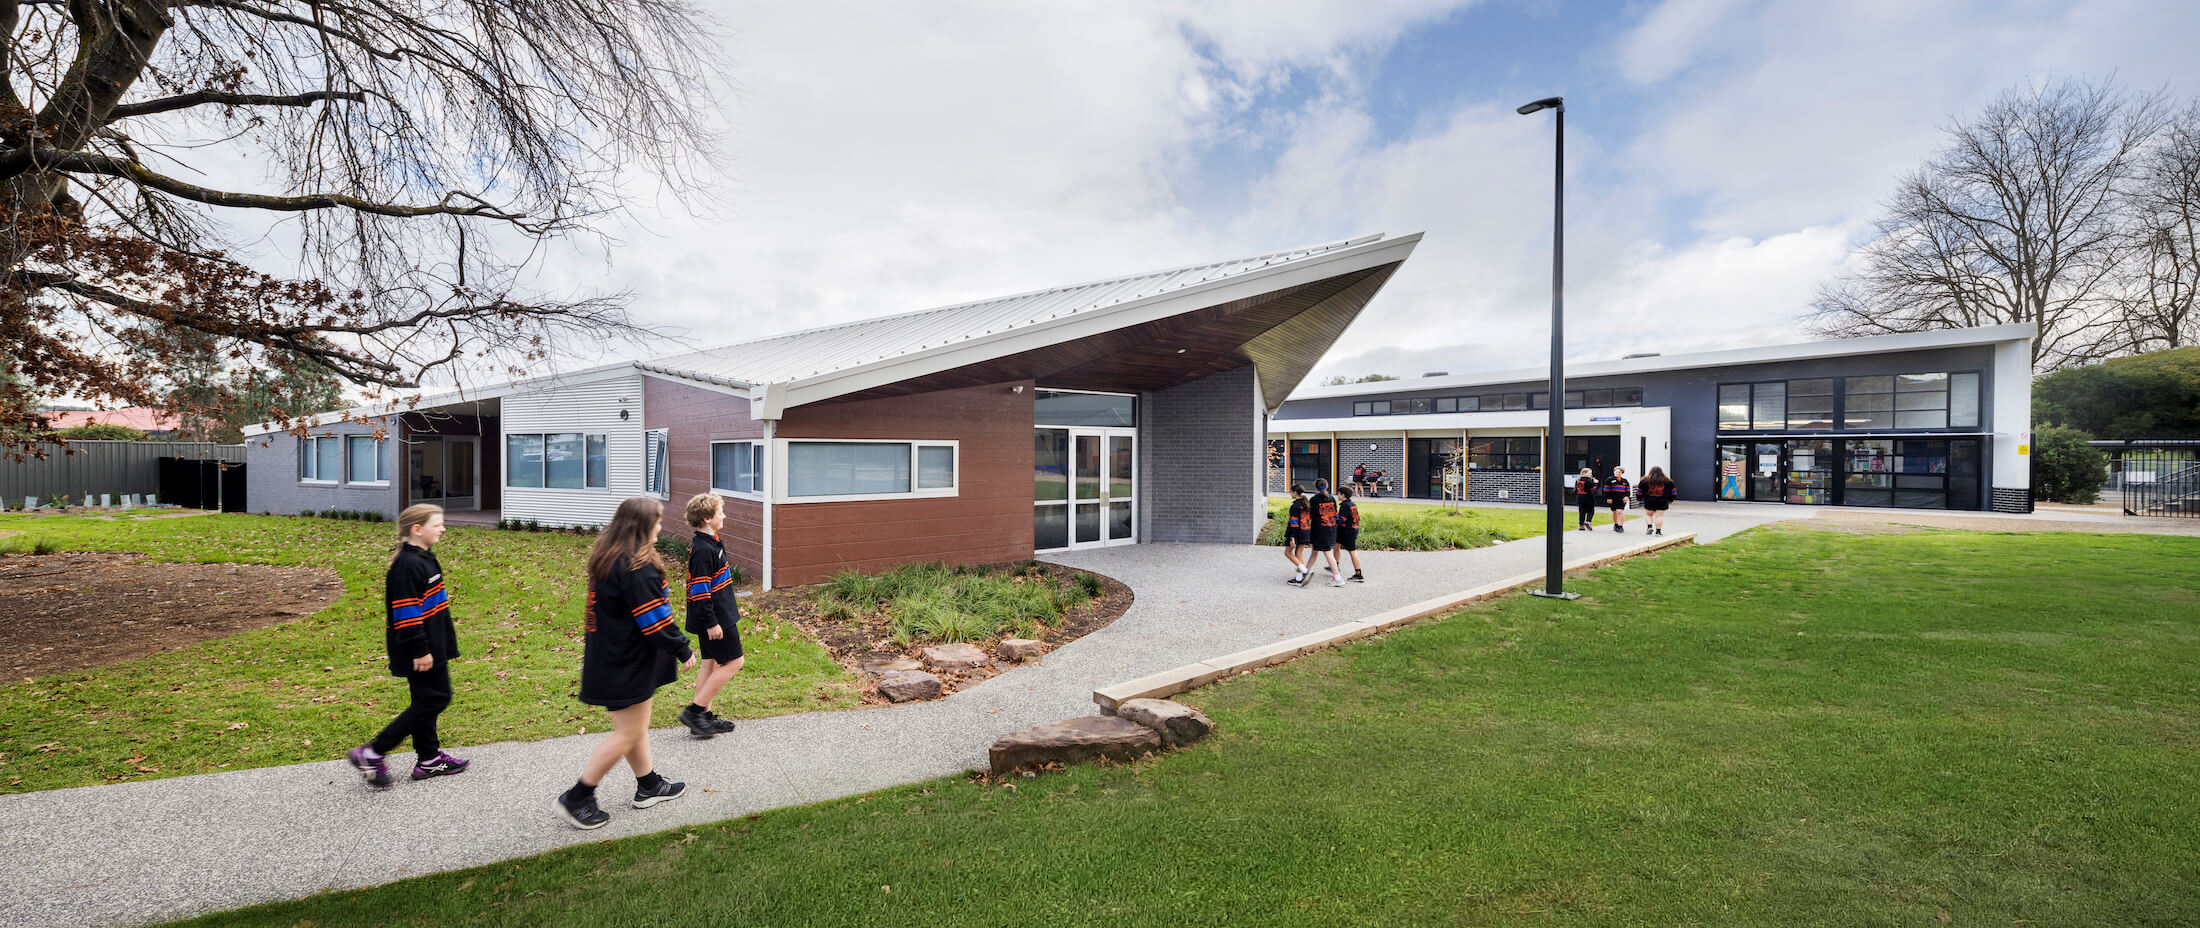 Panoramic image of students walking on path to new school building entry with pointed canopy and classrooms beyond